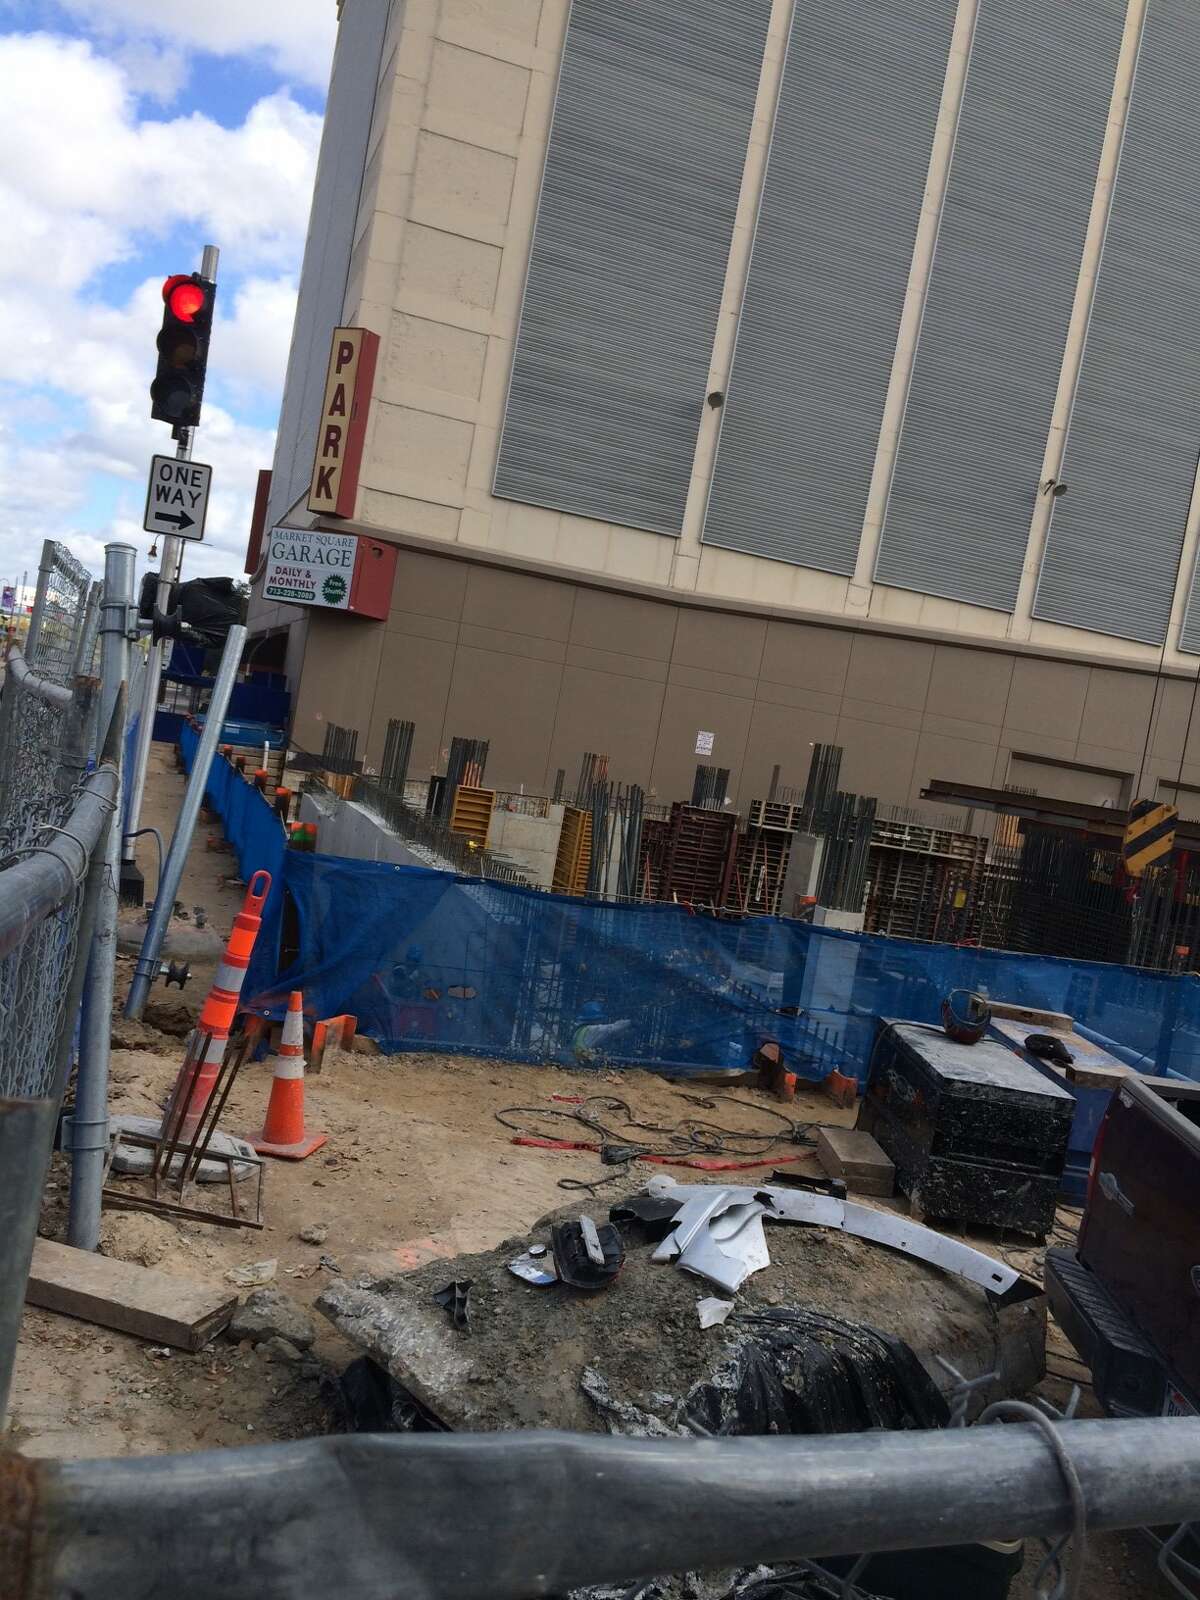 Parts from a pickup truck are shown after the vehicle drove into a downtown construction site.